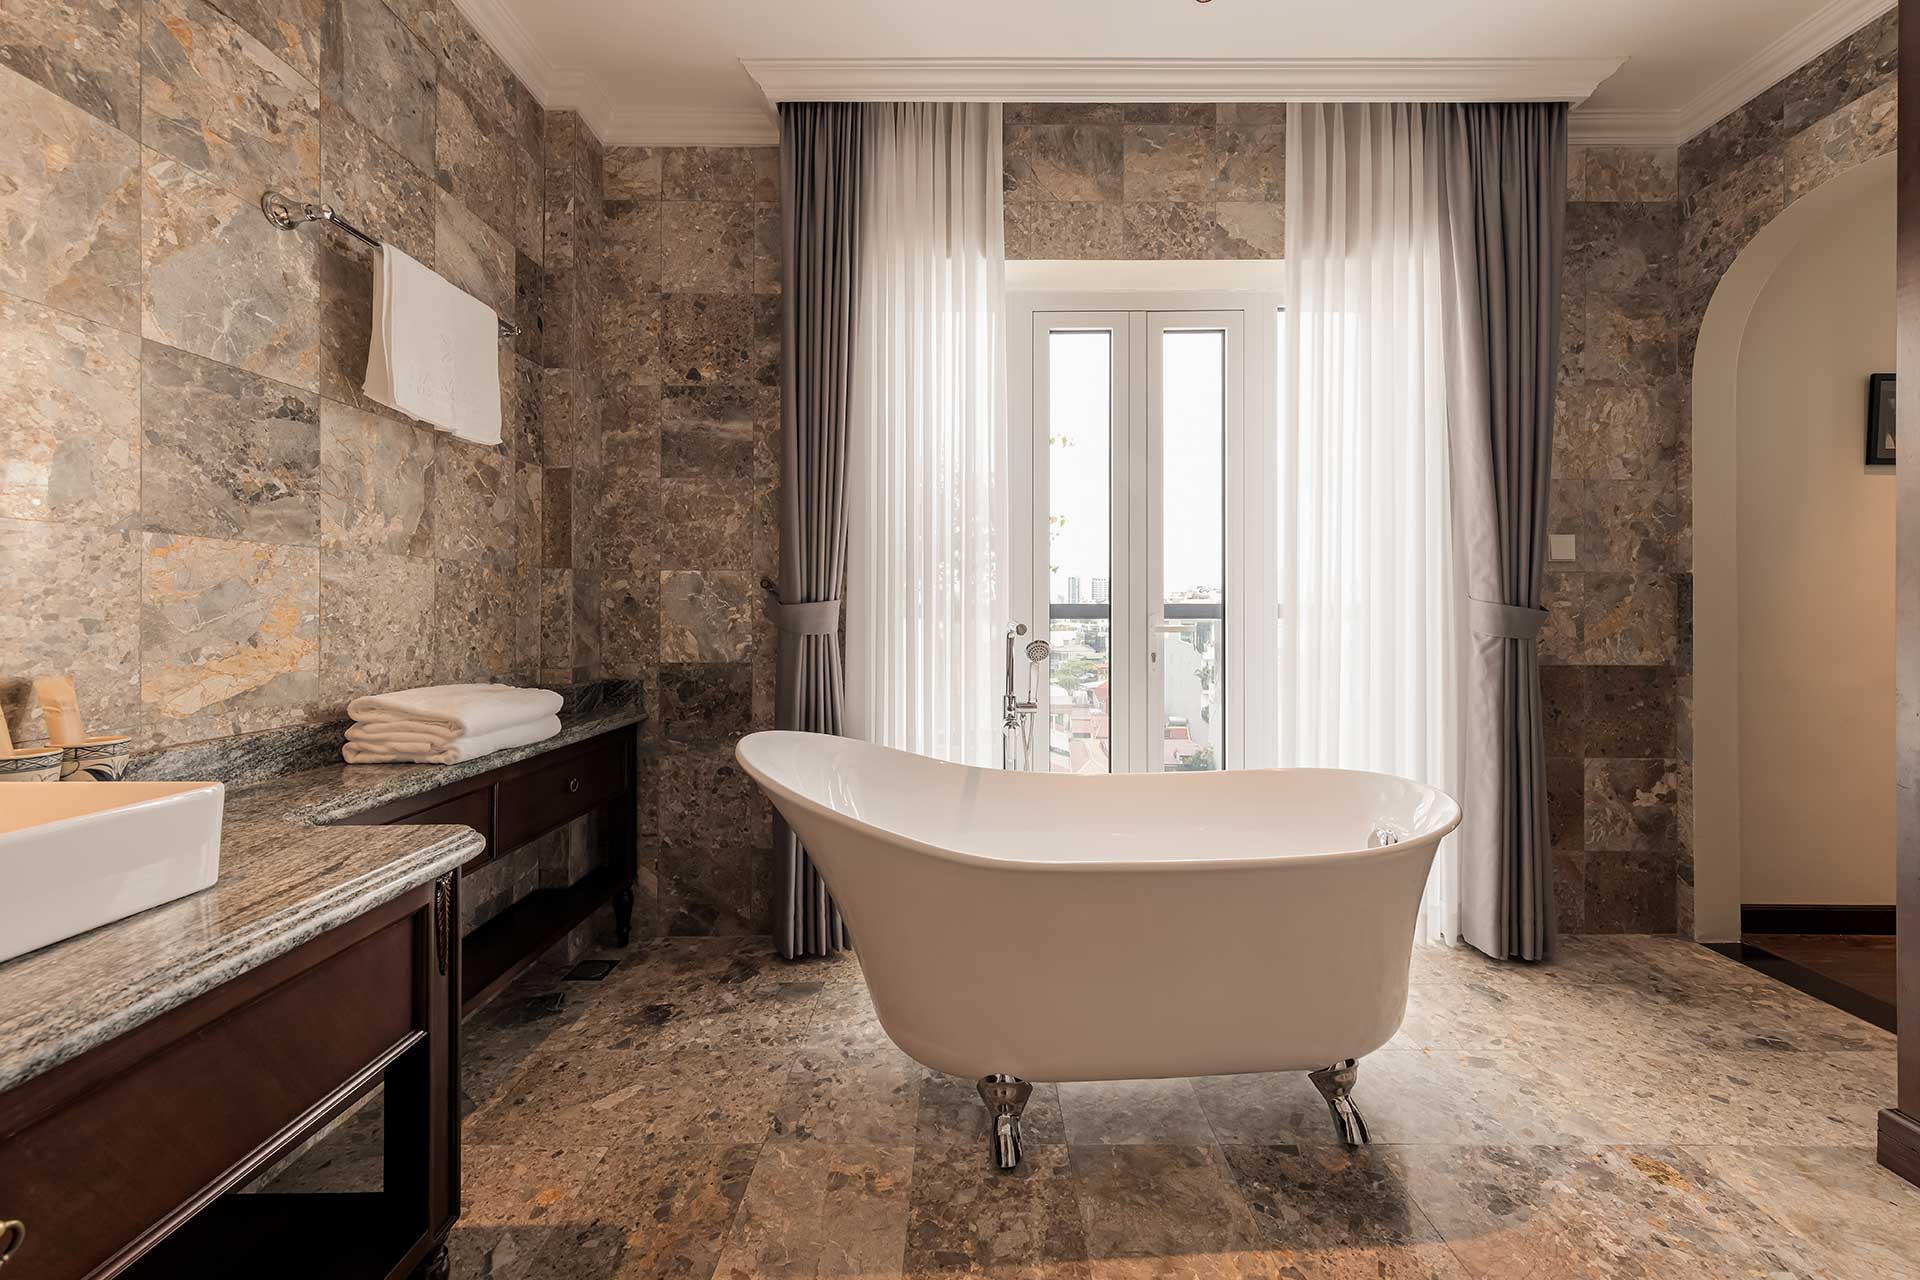 A luxury retreat
in the bustling Old Quarter